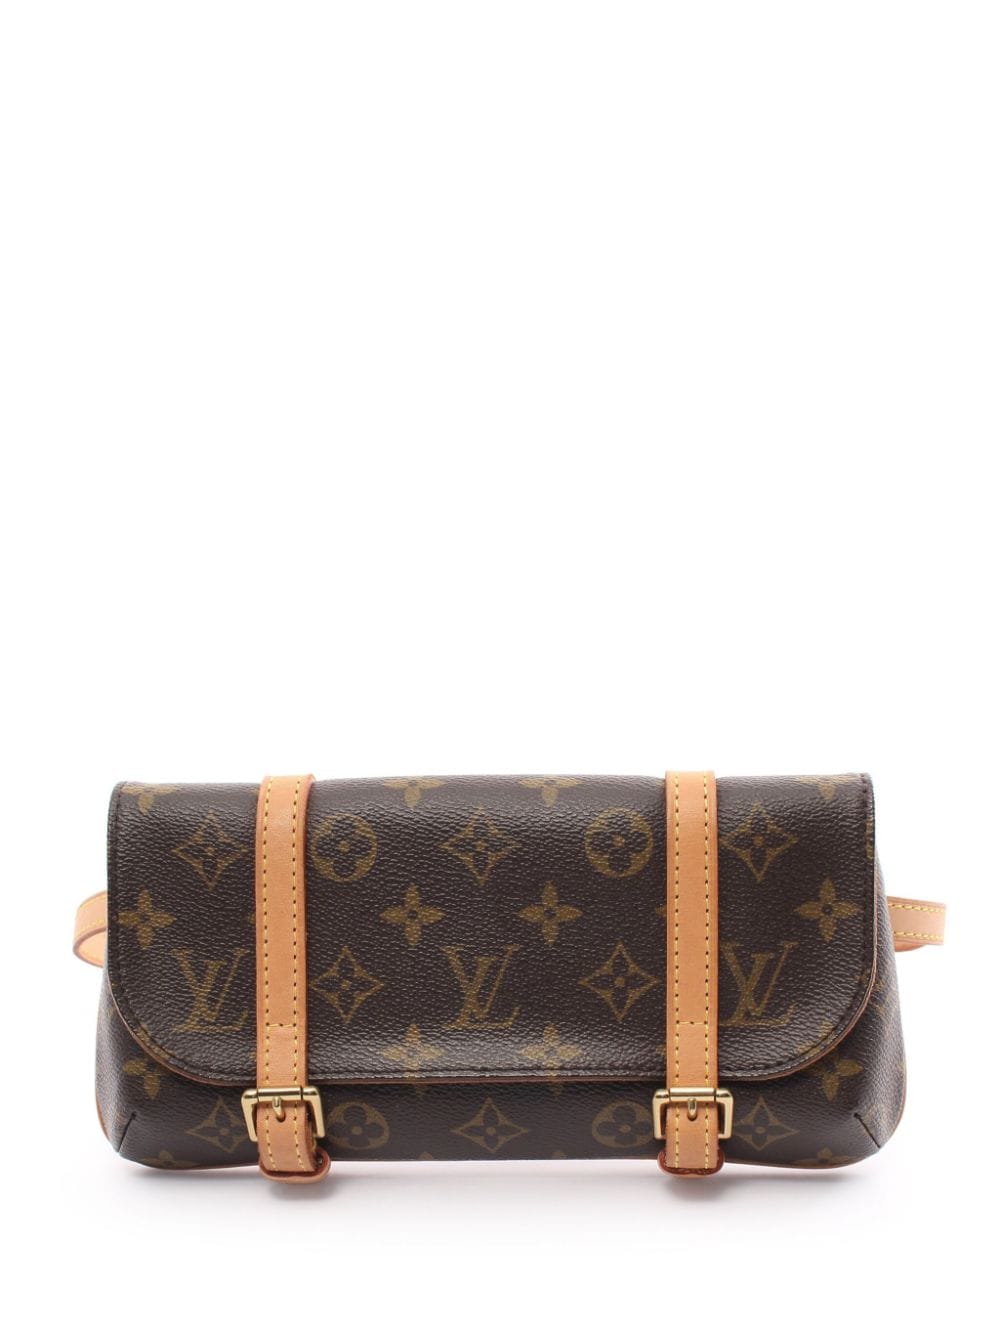 Pre-owned Louis Vuitton 2005 Pochette Murrell Belt Bag In Brown